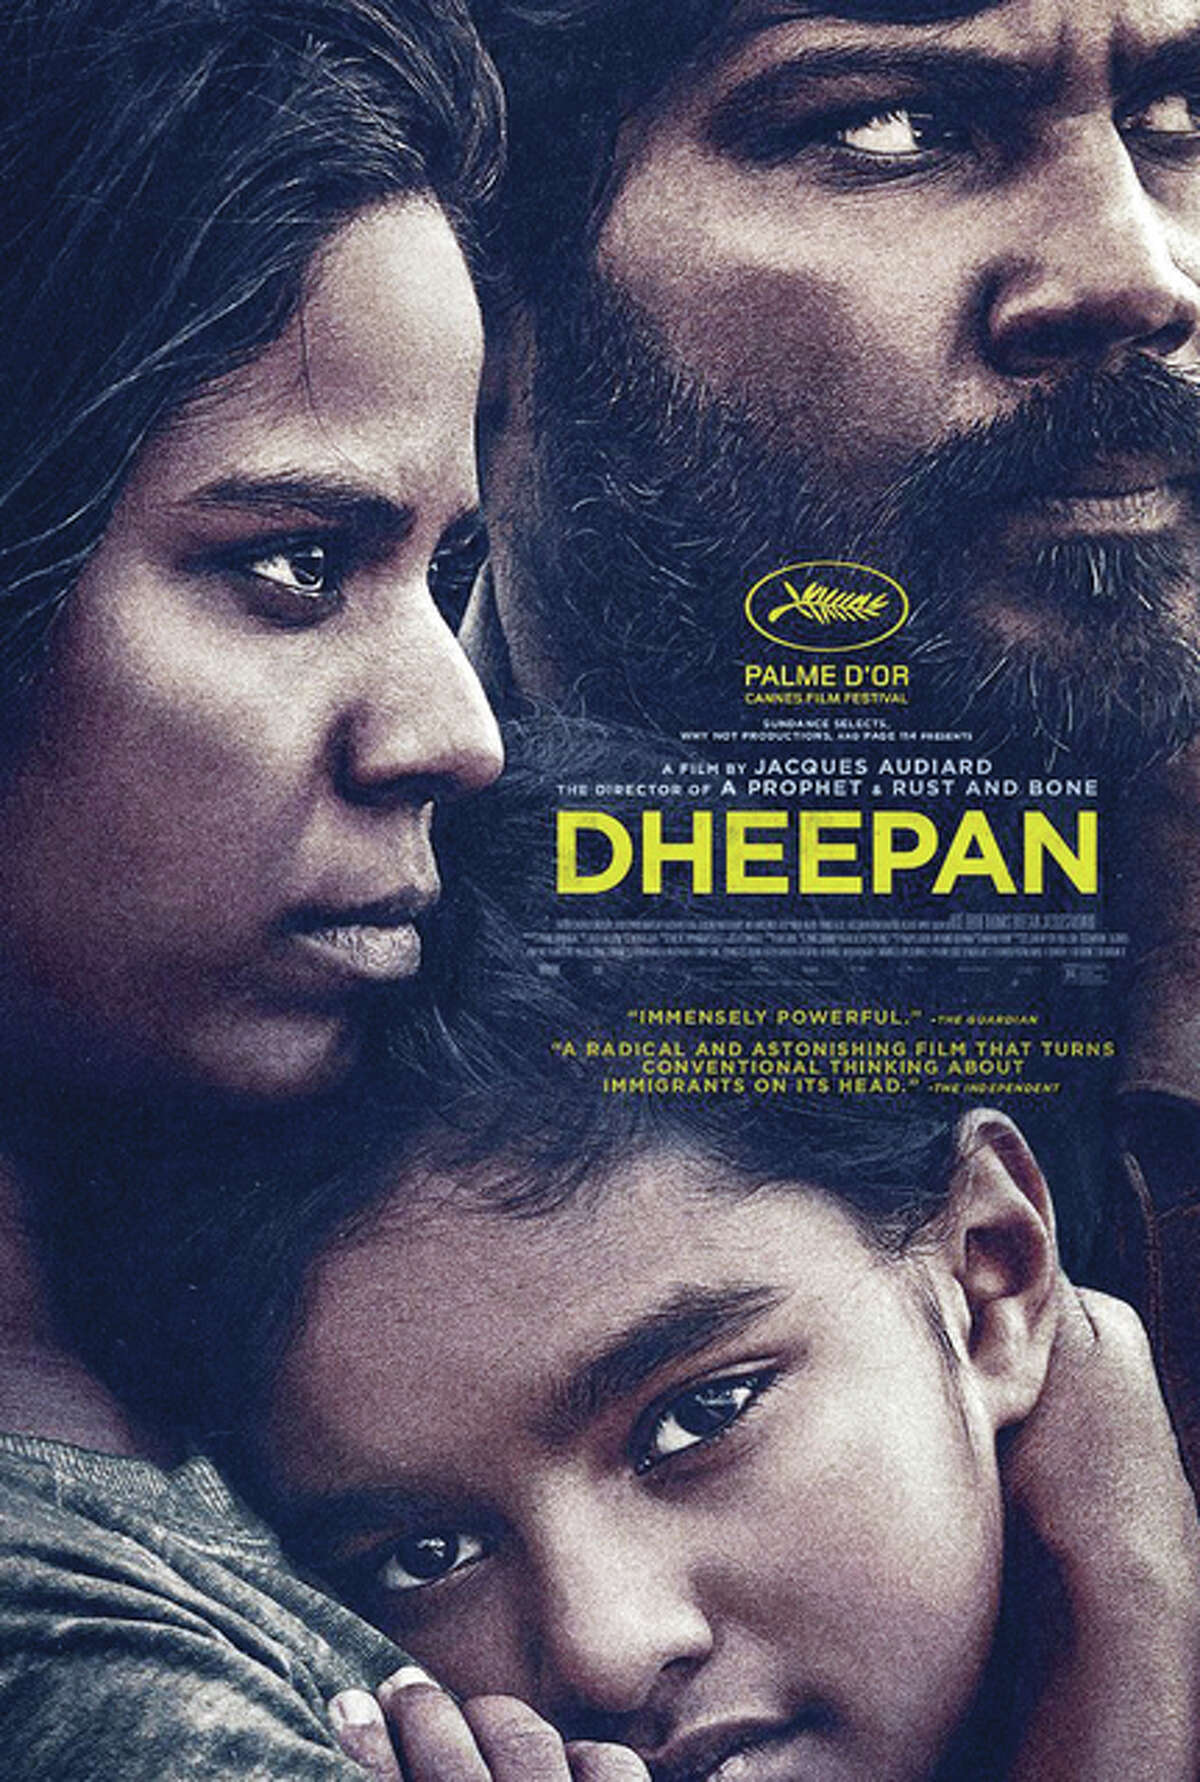 The movie poster for “Dheepan” touts its Palme d’Or win at the 2015 Cannes Film Festival.